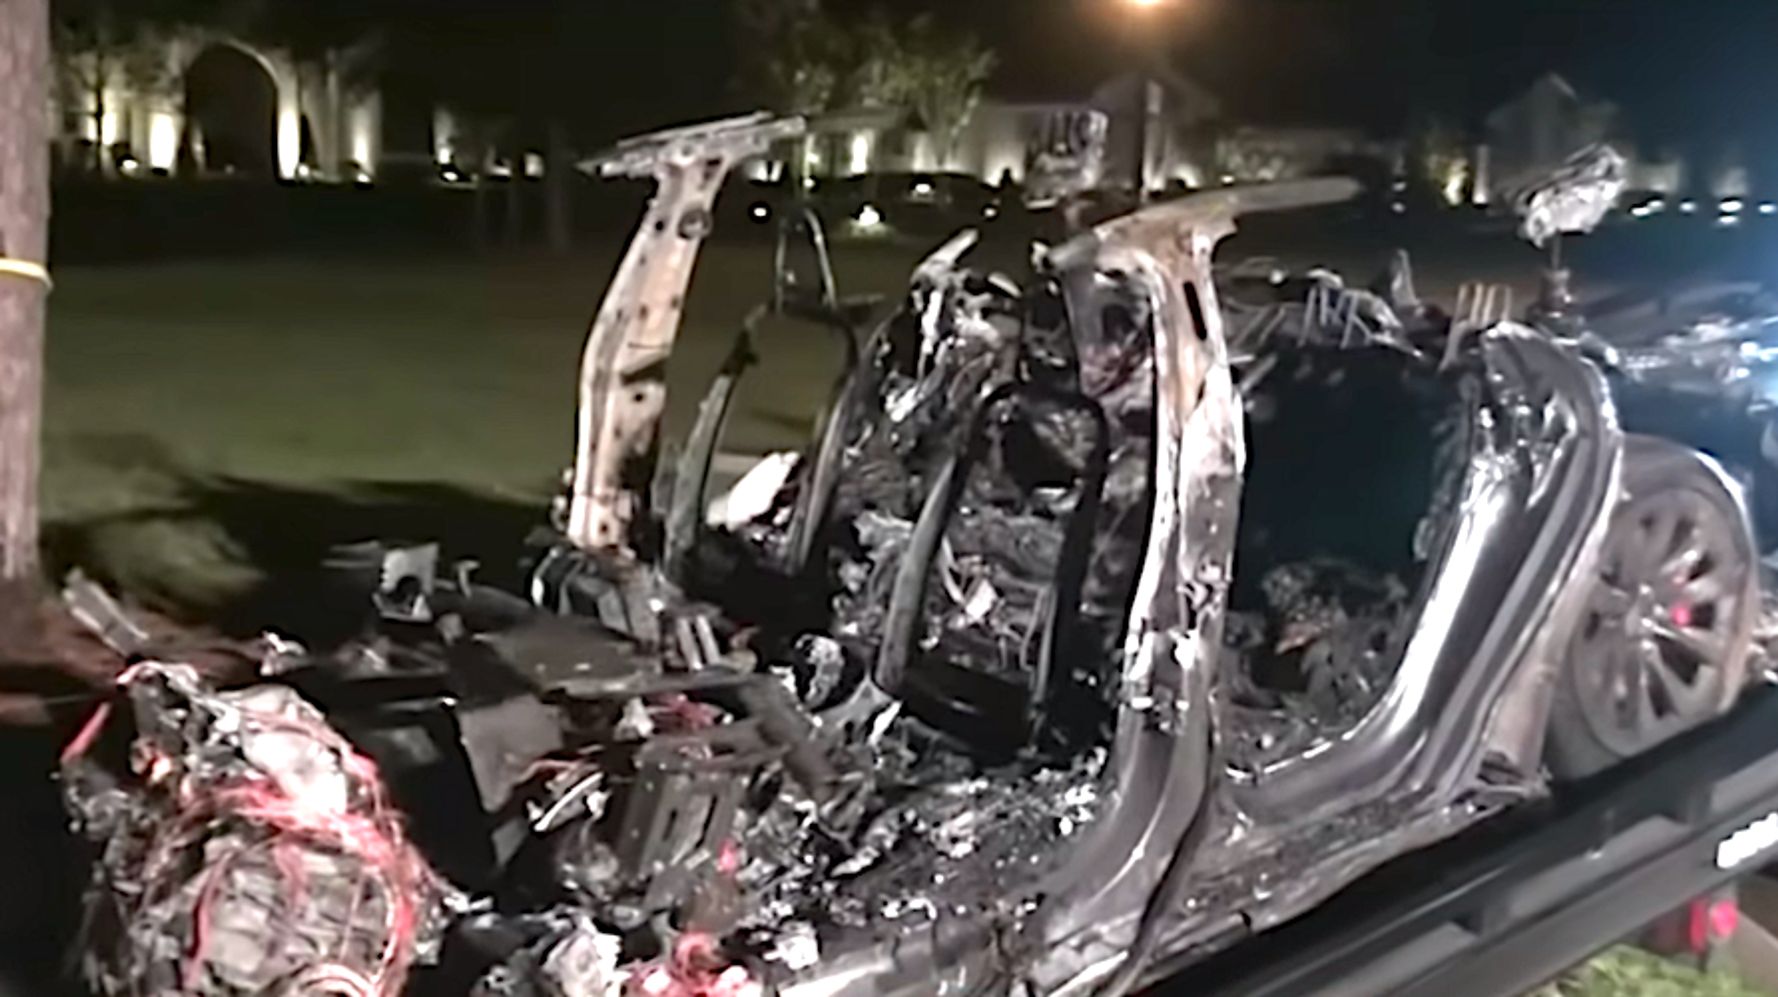 2 Killed in a fire accident when driverless Tesla hits a tree in Texas